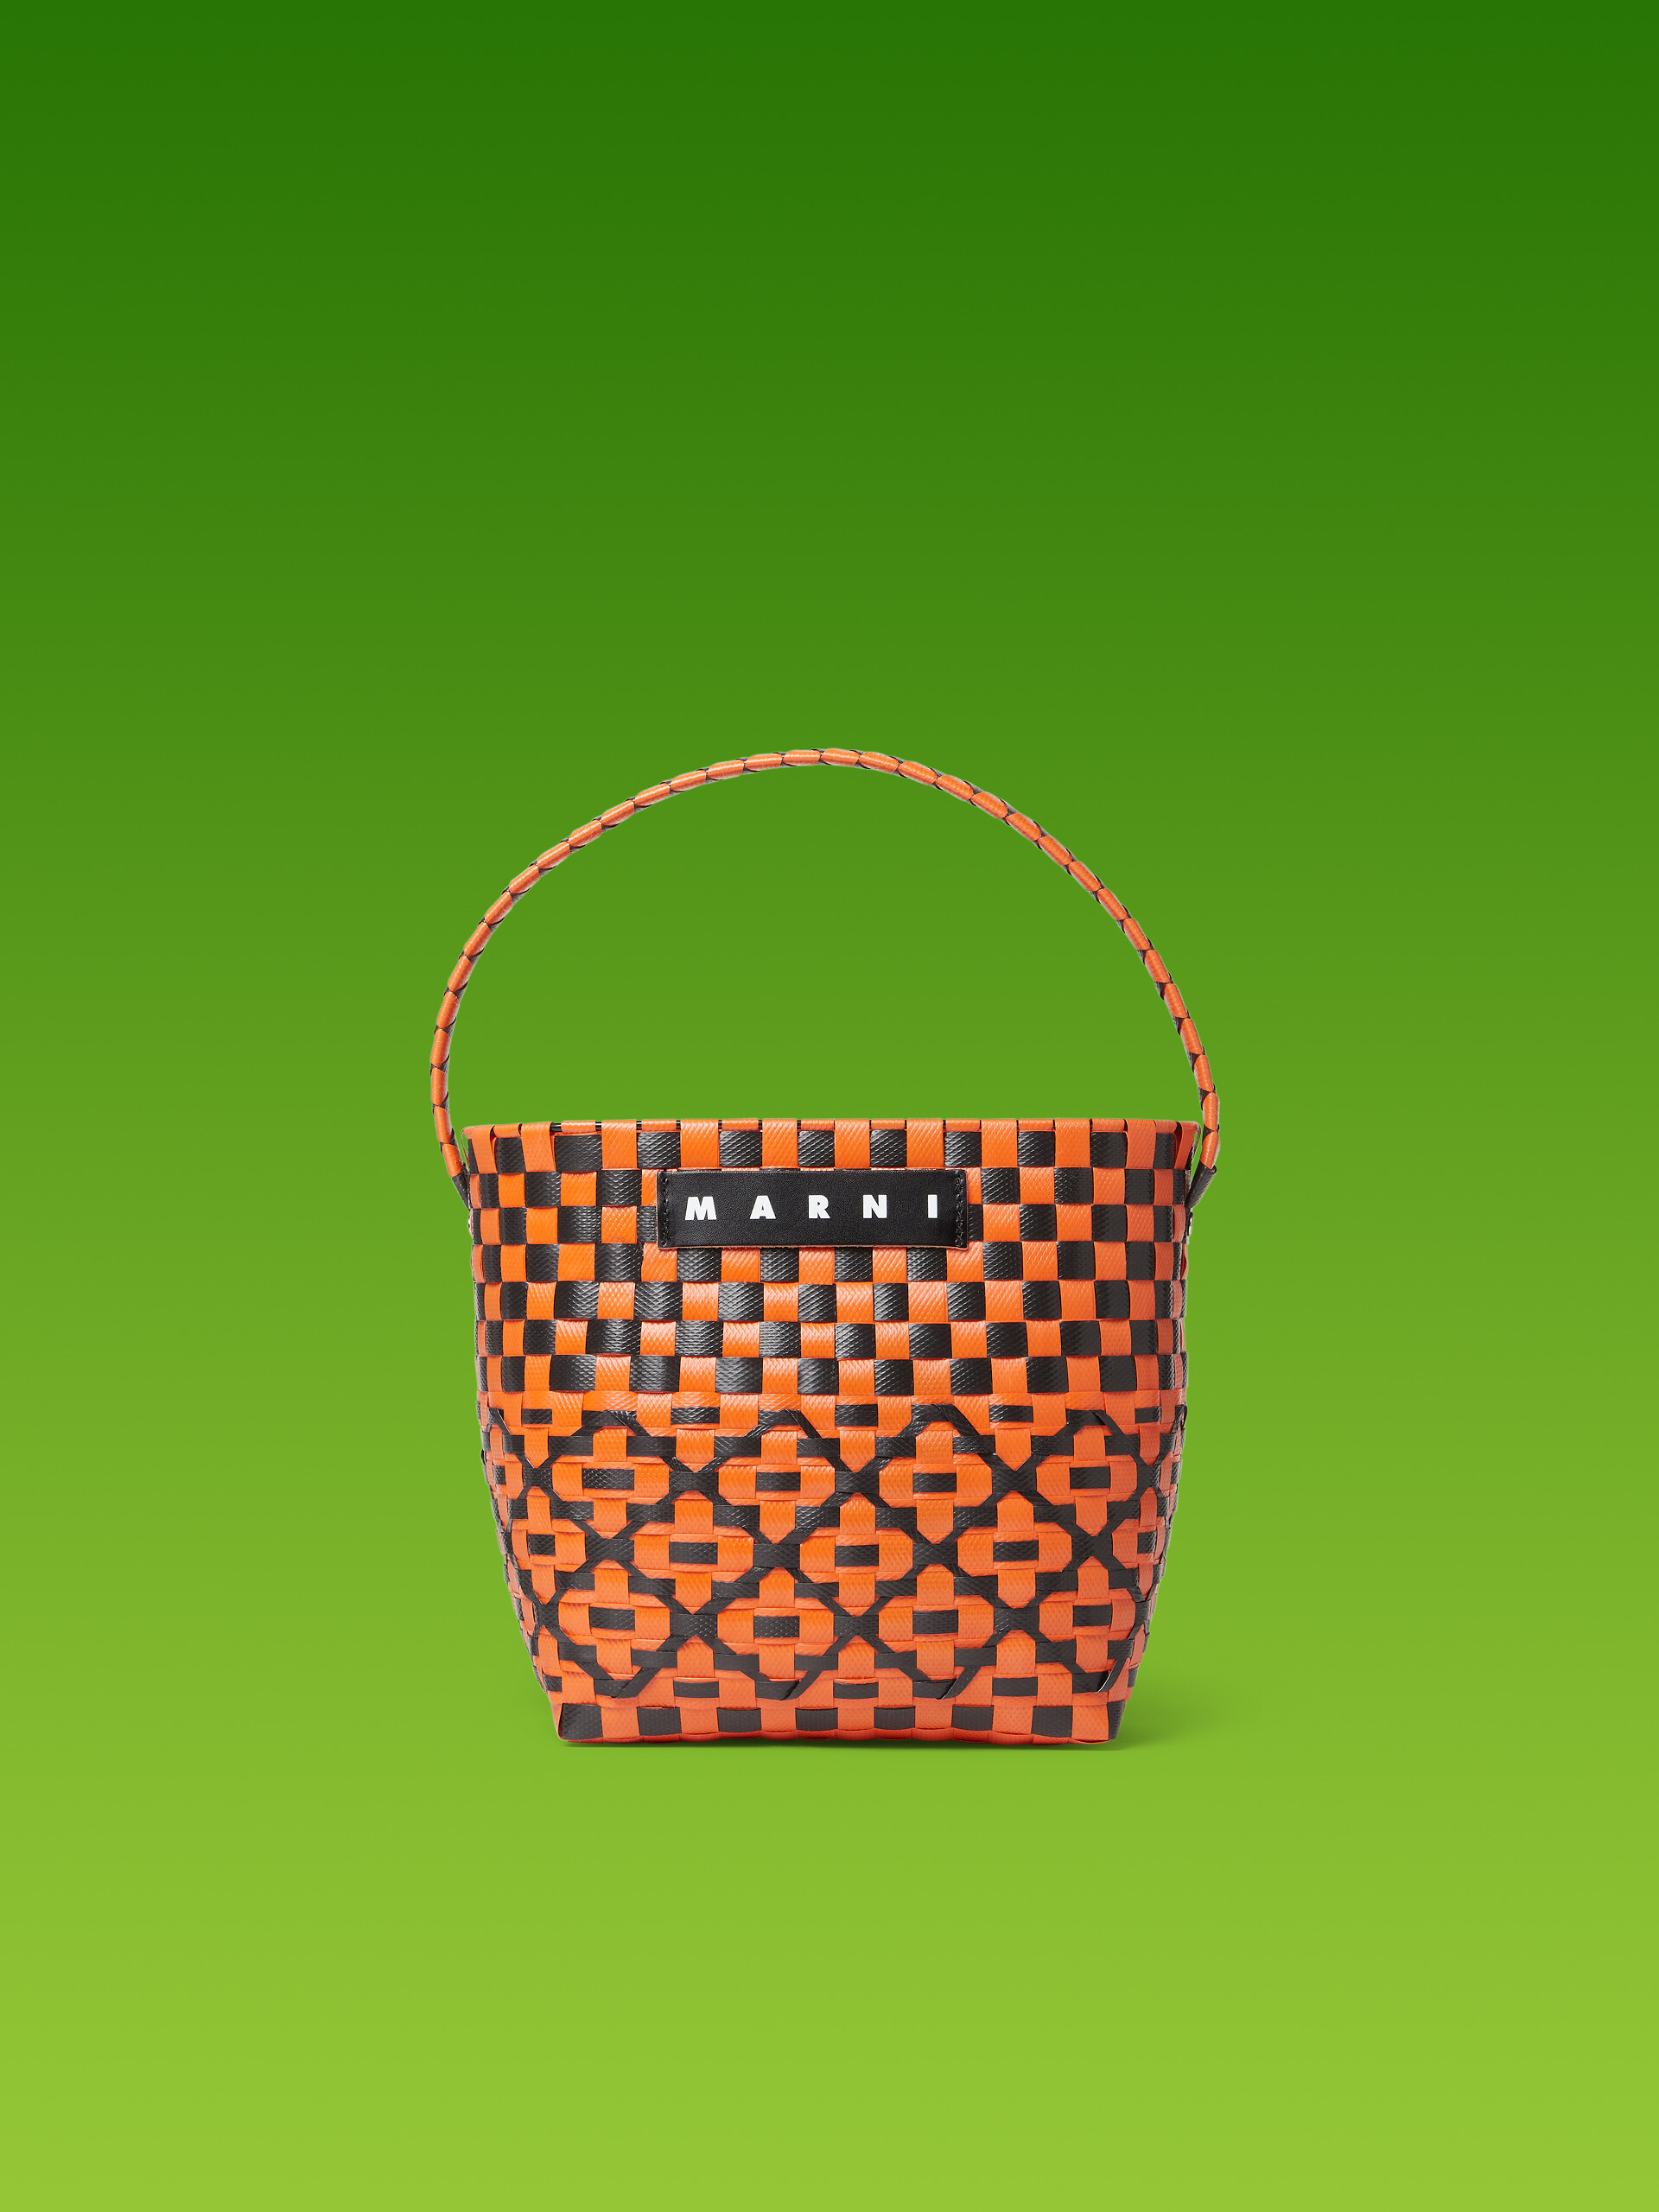 MARNI MARKET OVAL BASKET bag in orange and black woven material - Bags - Image 1